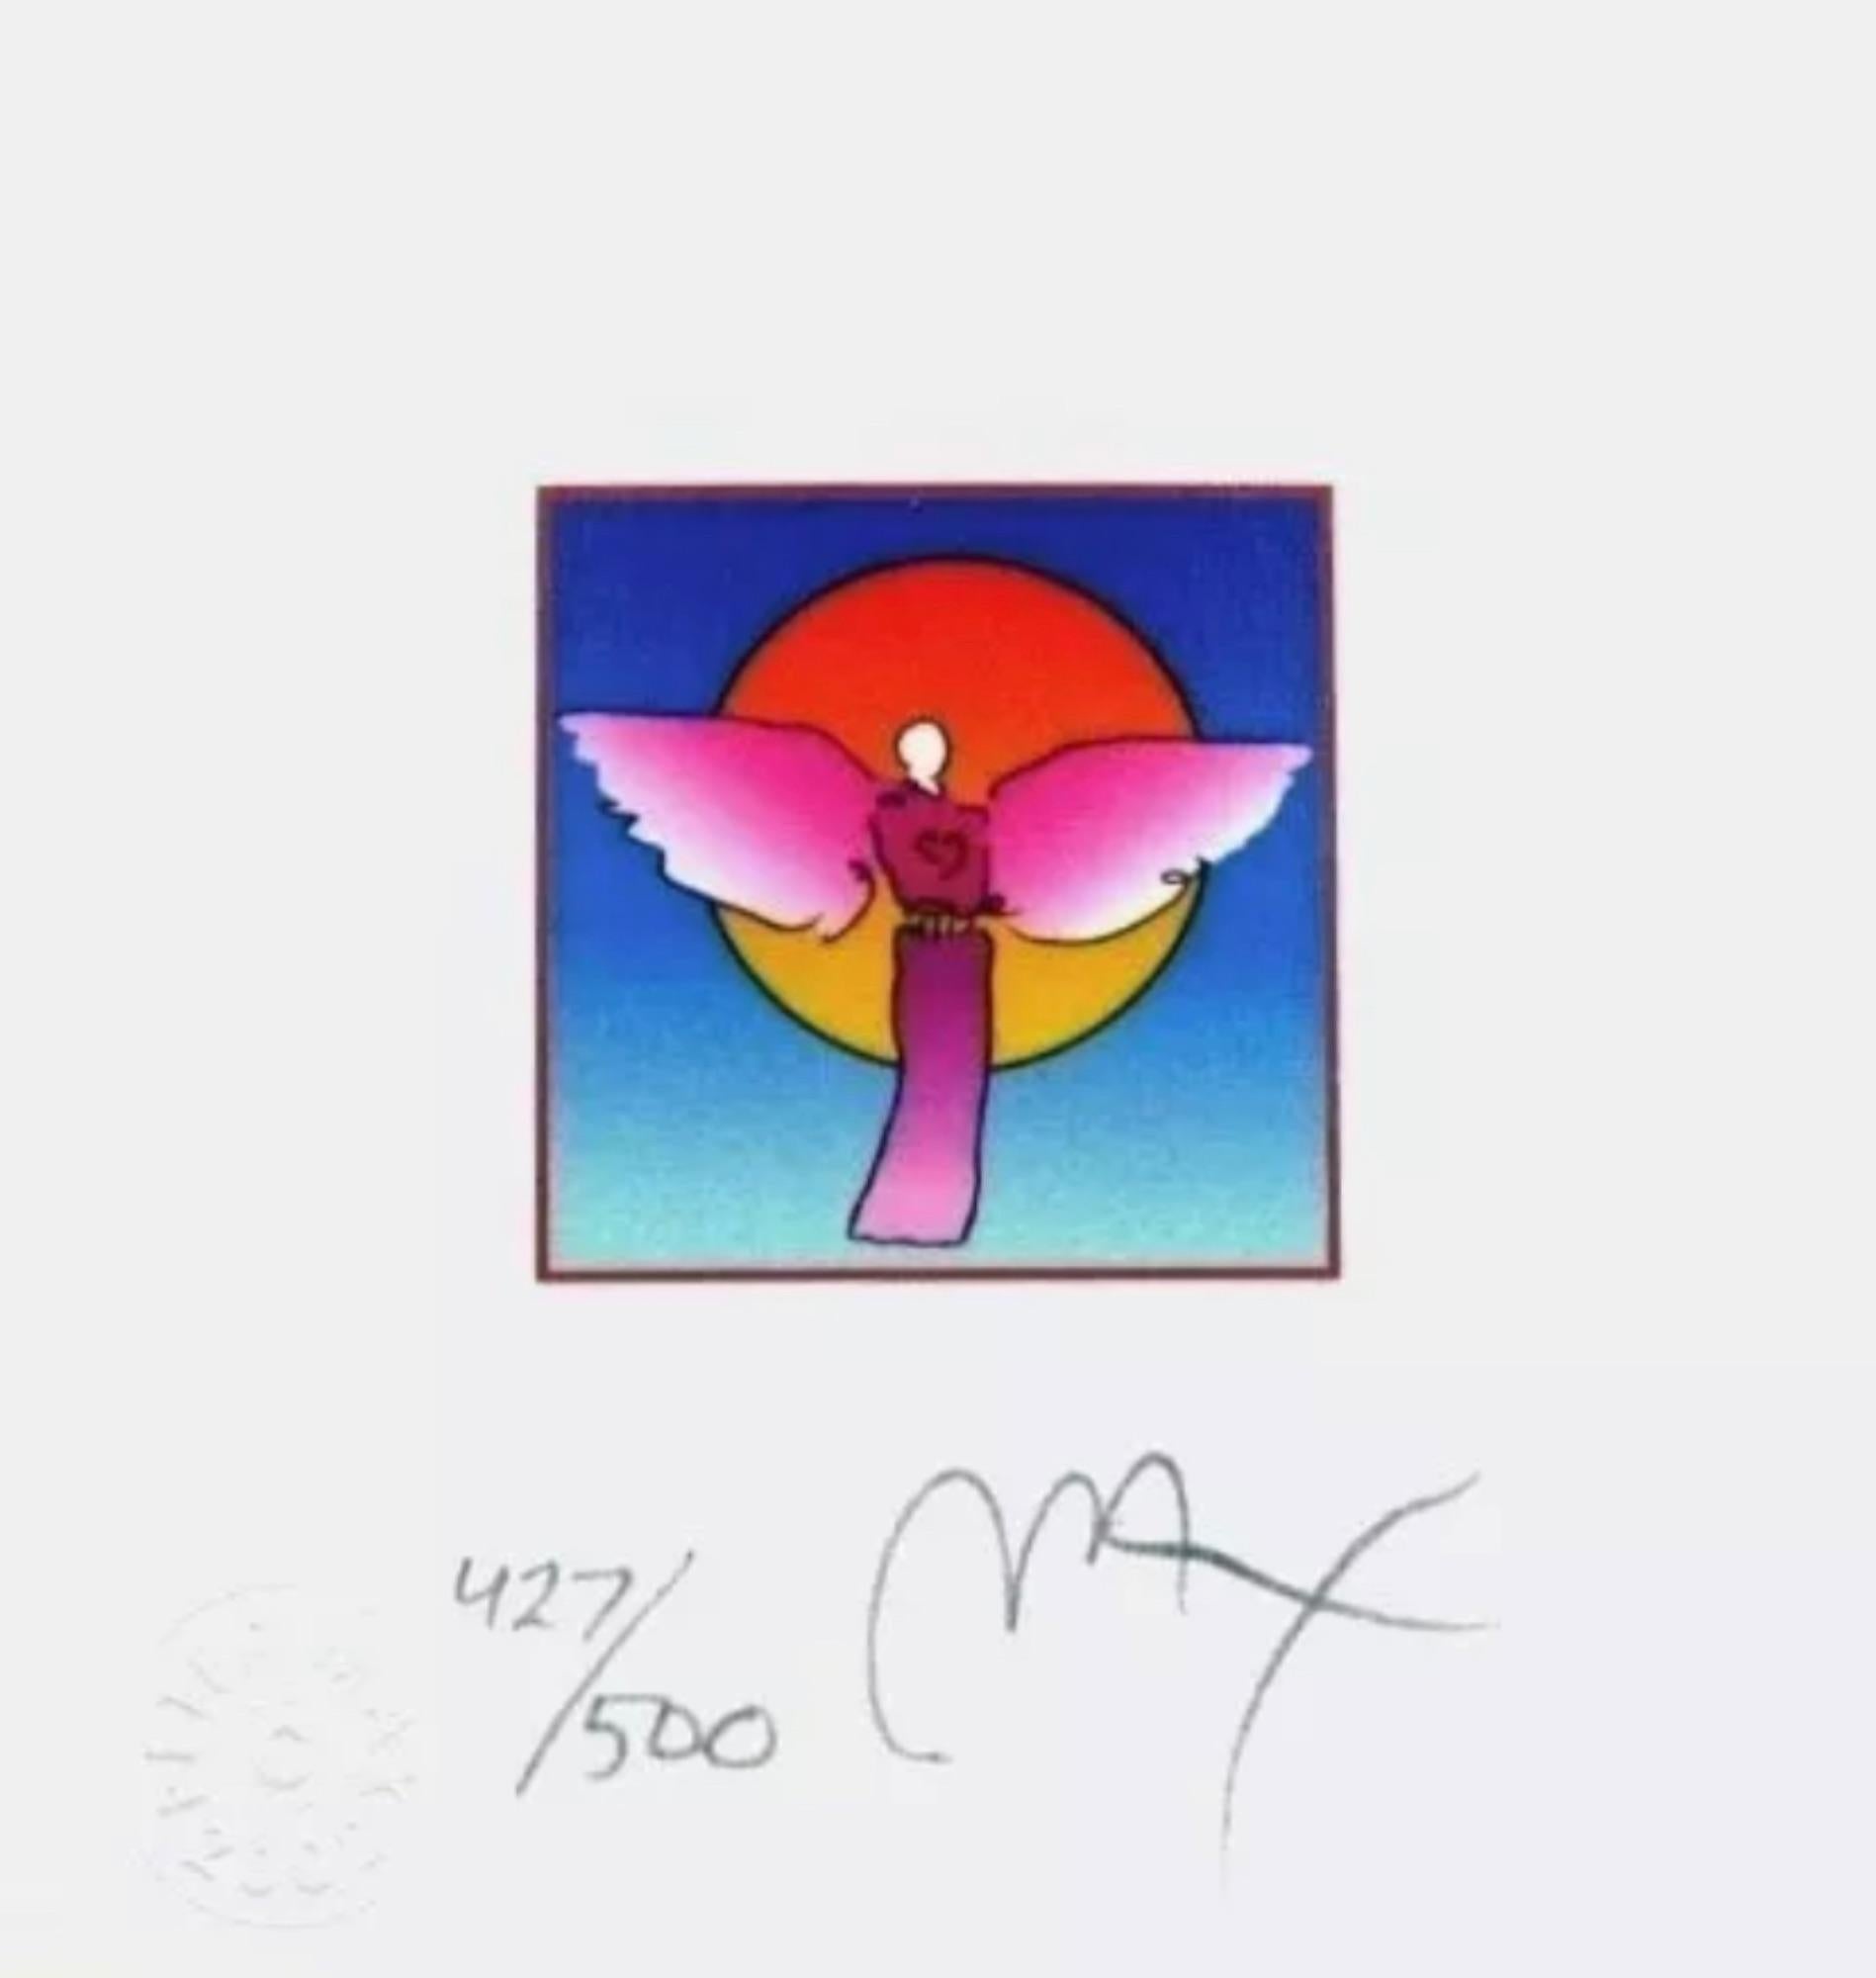 Artist: Peter Max (1937)
Title: Angel with Sun II
Year: 2002
Edition: 427/500, plus proofs
Medium: Lithograph on Lustro Saxony paper
Size: 4.87 x 4.5 inches
Condition: Excellent
Inscription: Signed and numbered by the artist.
Notes: Published by Via